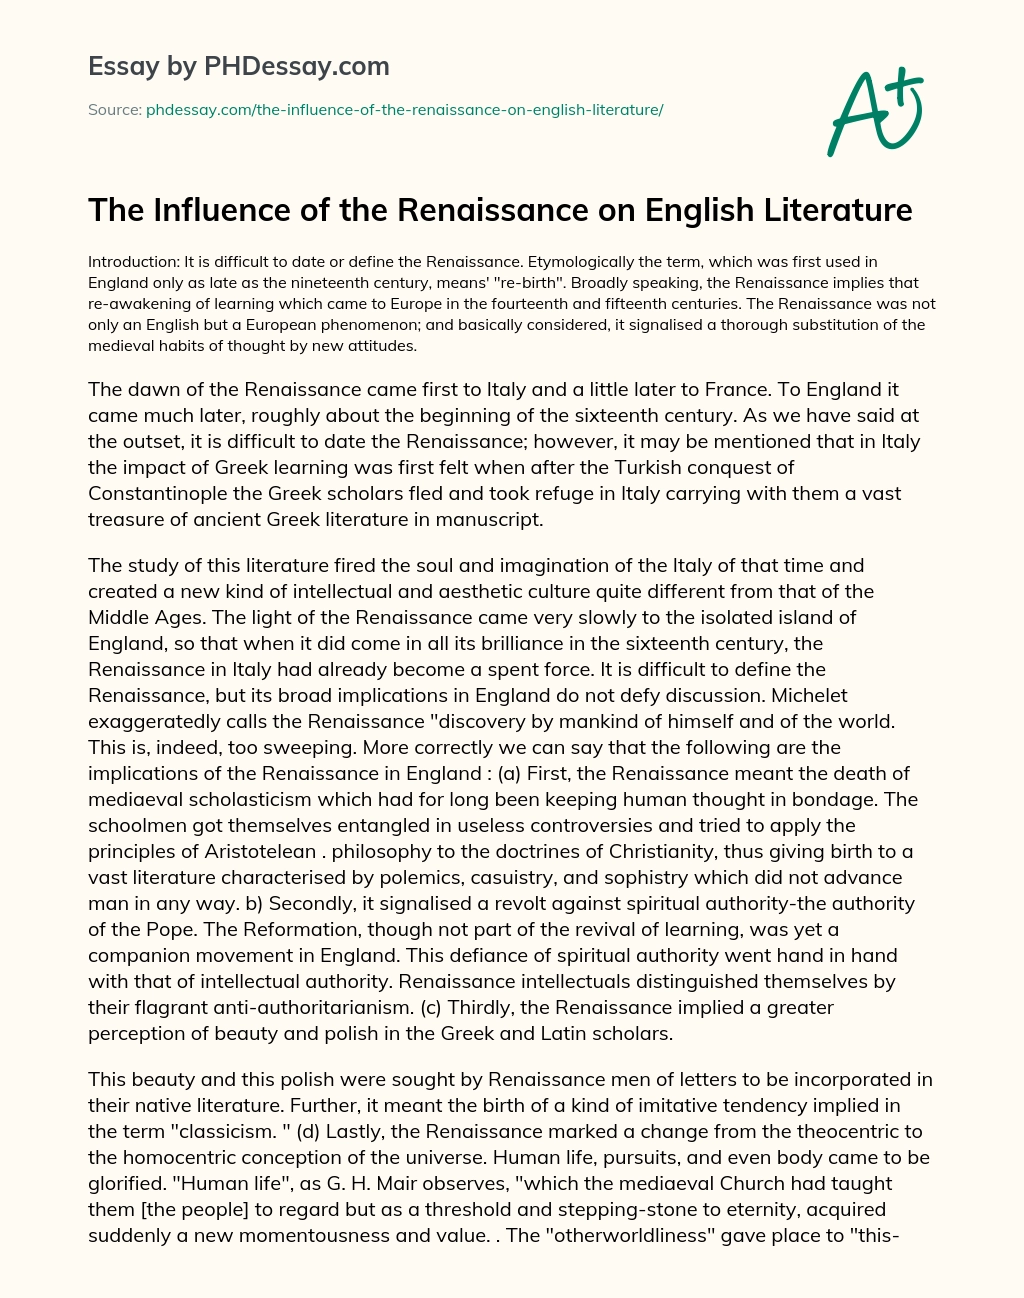 The Influence of the Renaissance on English Literature essay